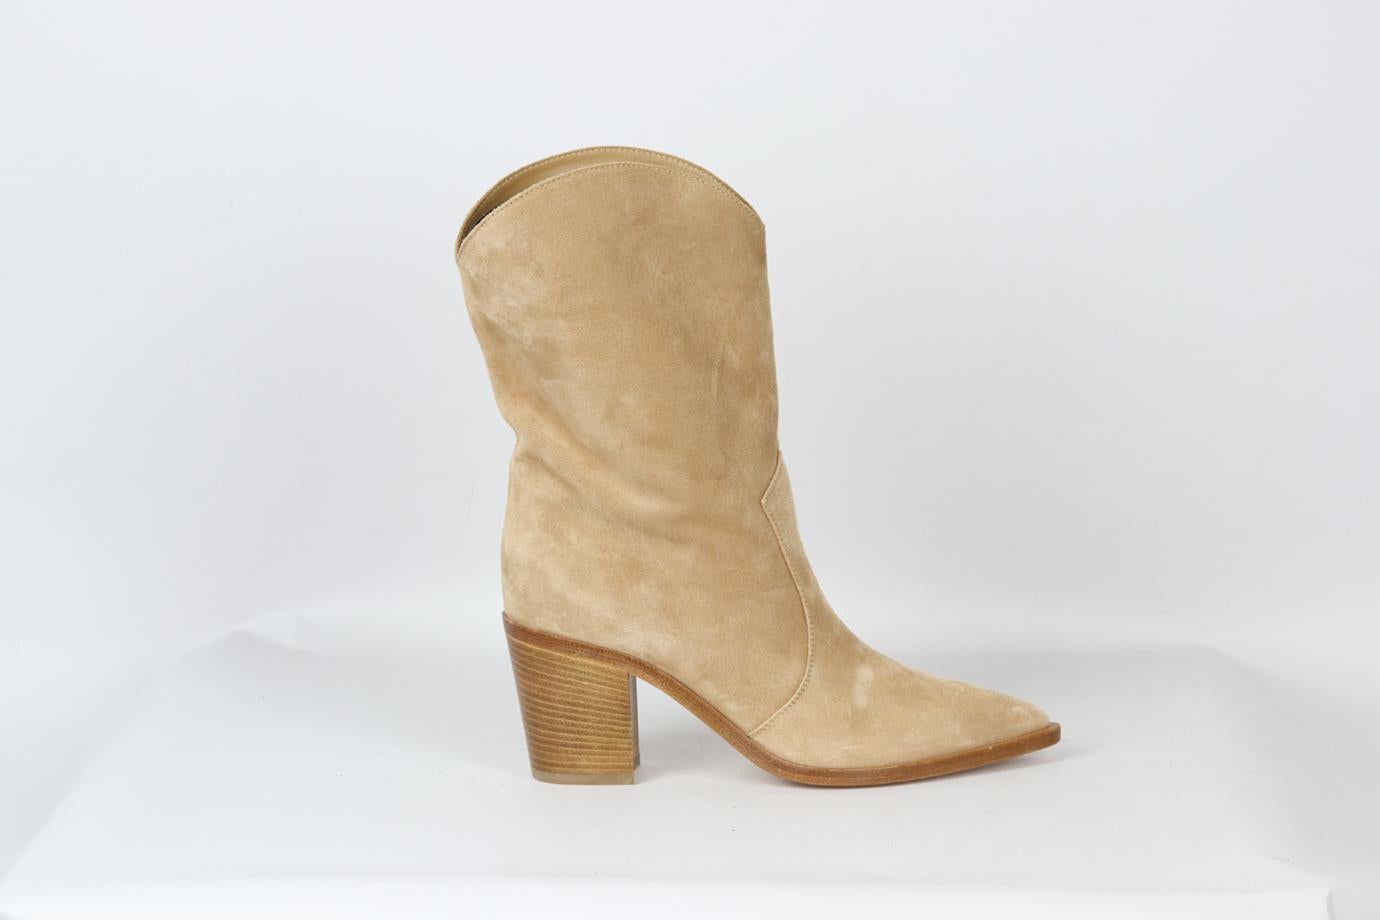 Gianvito Rossi suede boots. Blush. Pull on. Does not come with dustbag or box. Size: EU 38 (UK 5, US 8). Heel Height: 2 in. Platform: 0.2 in. Shaft: 7 in. Insole: 9.8 in. New without box